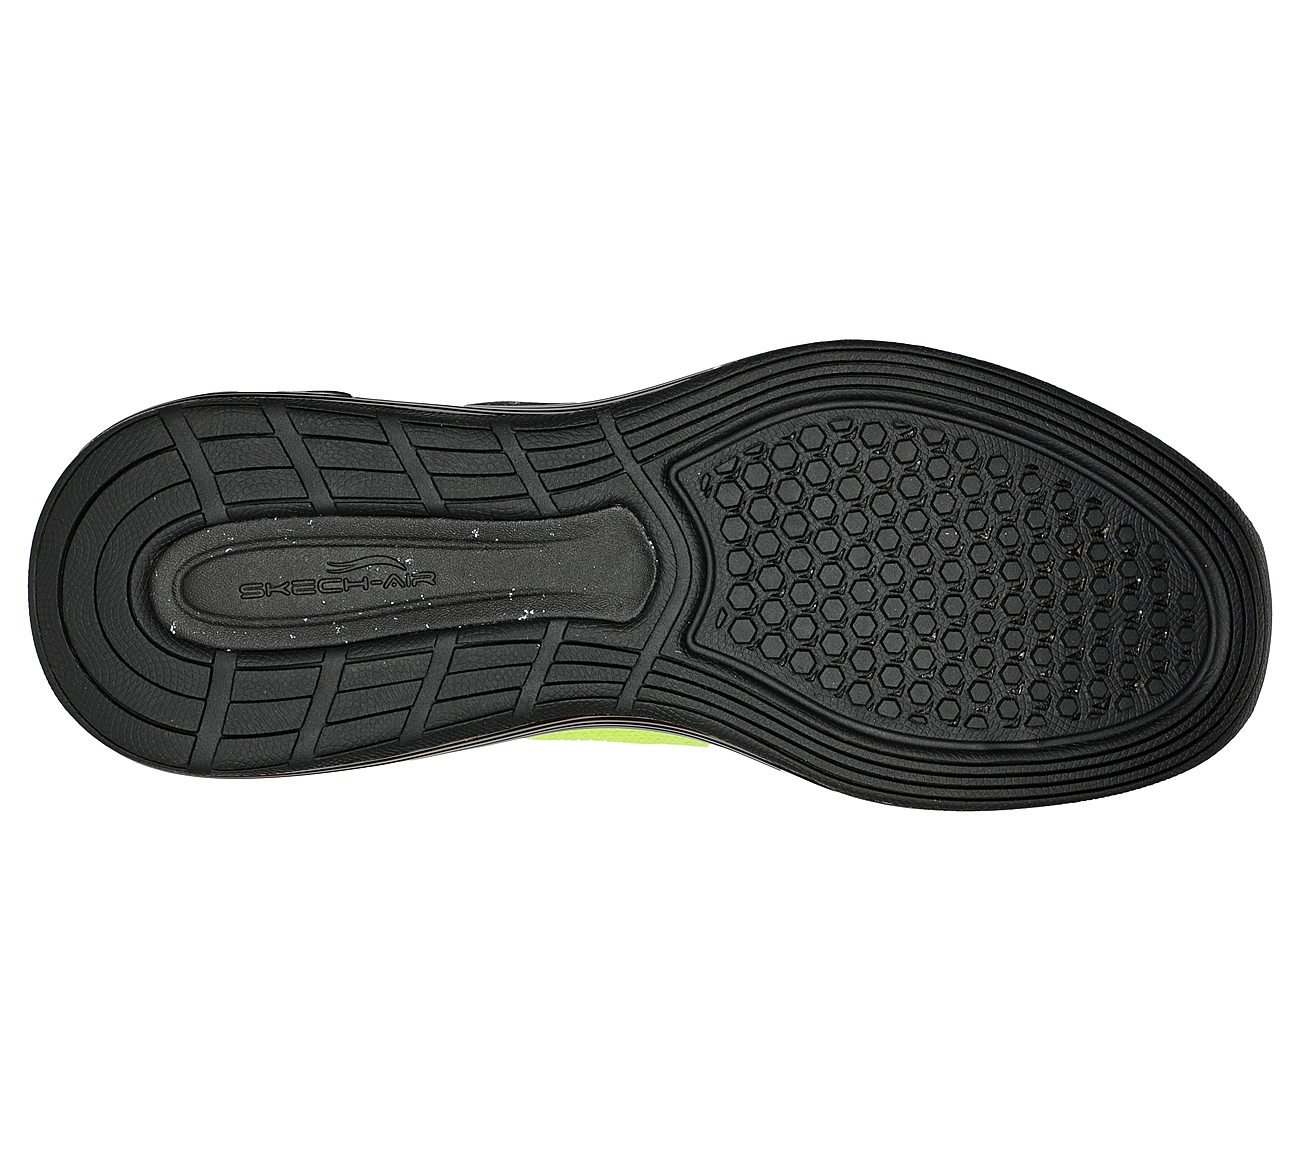 ARCH FIT ELEMENT AIR, LIME/BLACK Footwear Bottom View